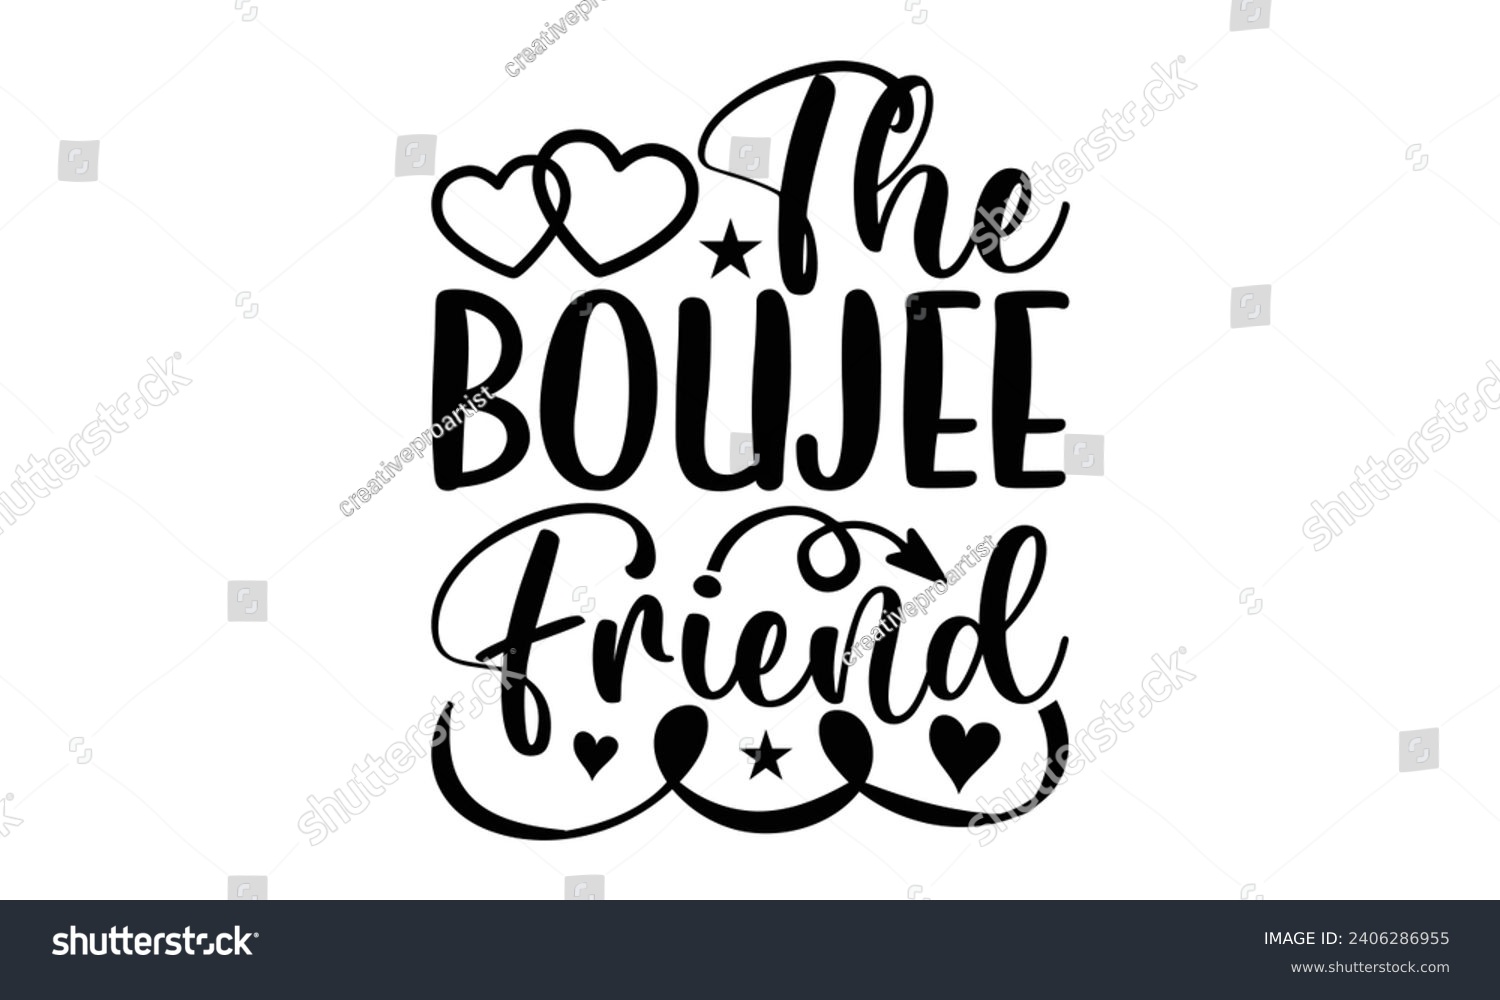 SVG of The Boujee Friend- Best friends t- shirt design, Hand drawn vintage illustration with hand-lettering and decoration elements, greeting card template with typography text svg